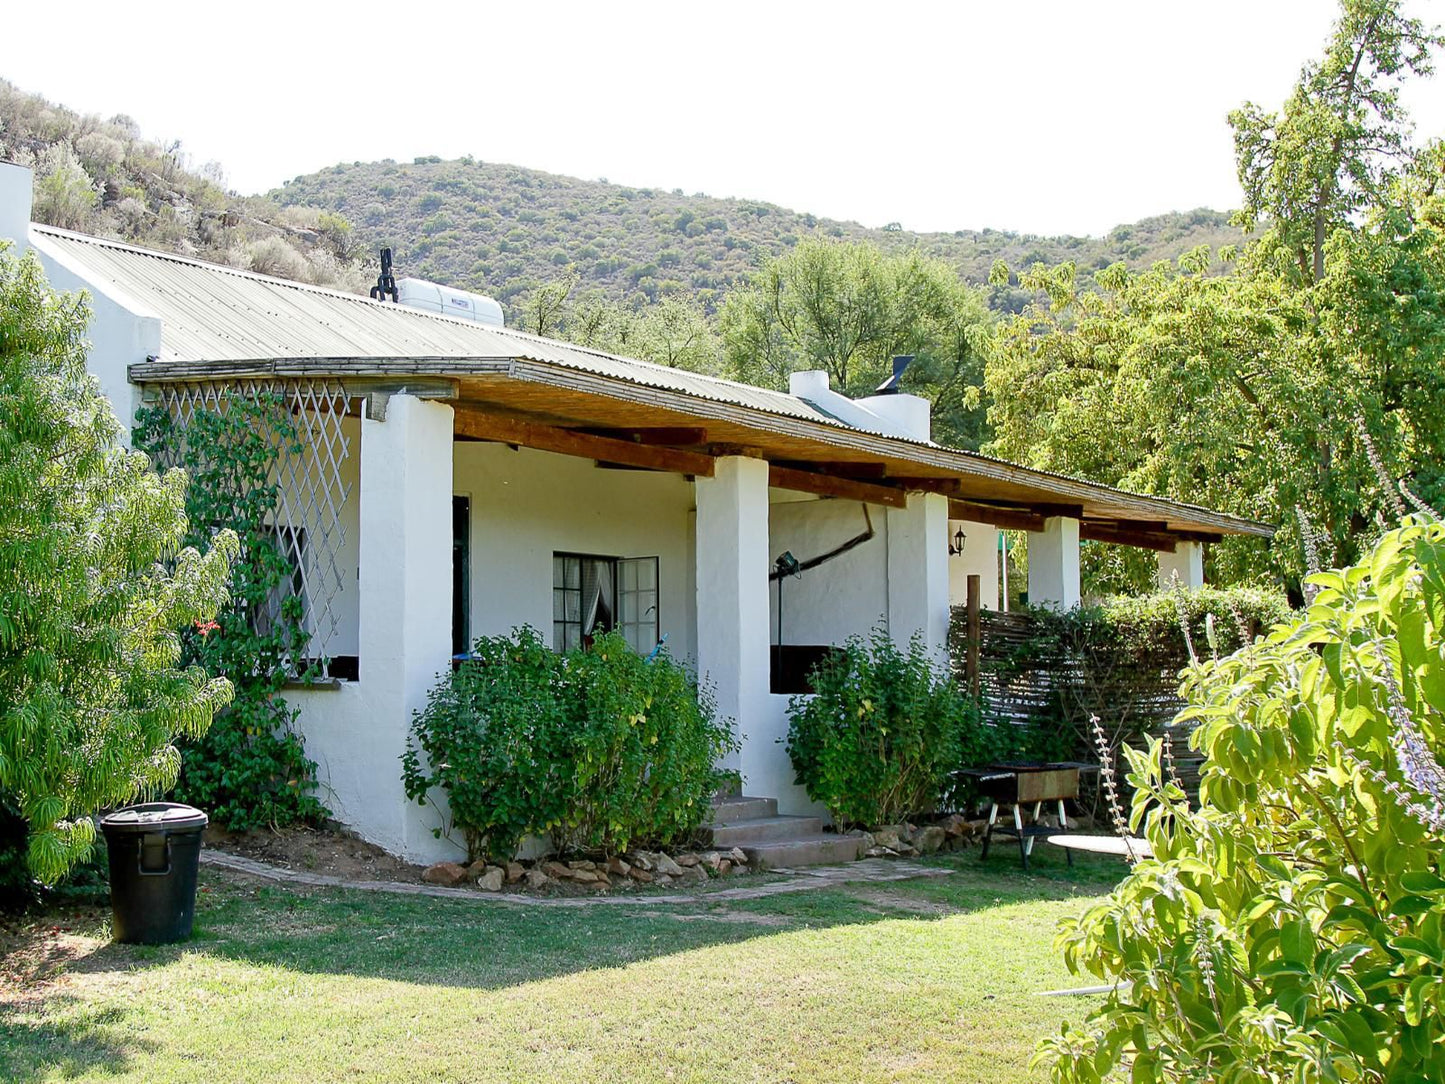 Kranskloof Country Lodge Oudtshoorn Western Cape South Africa House, Building, Architecture